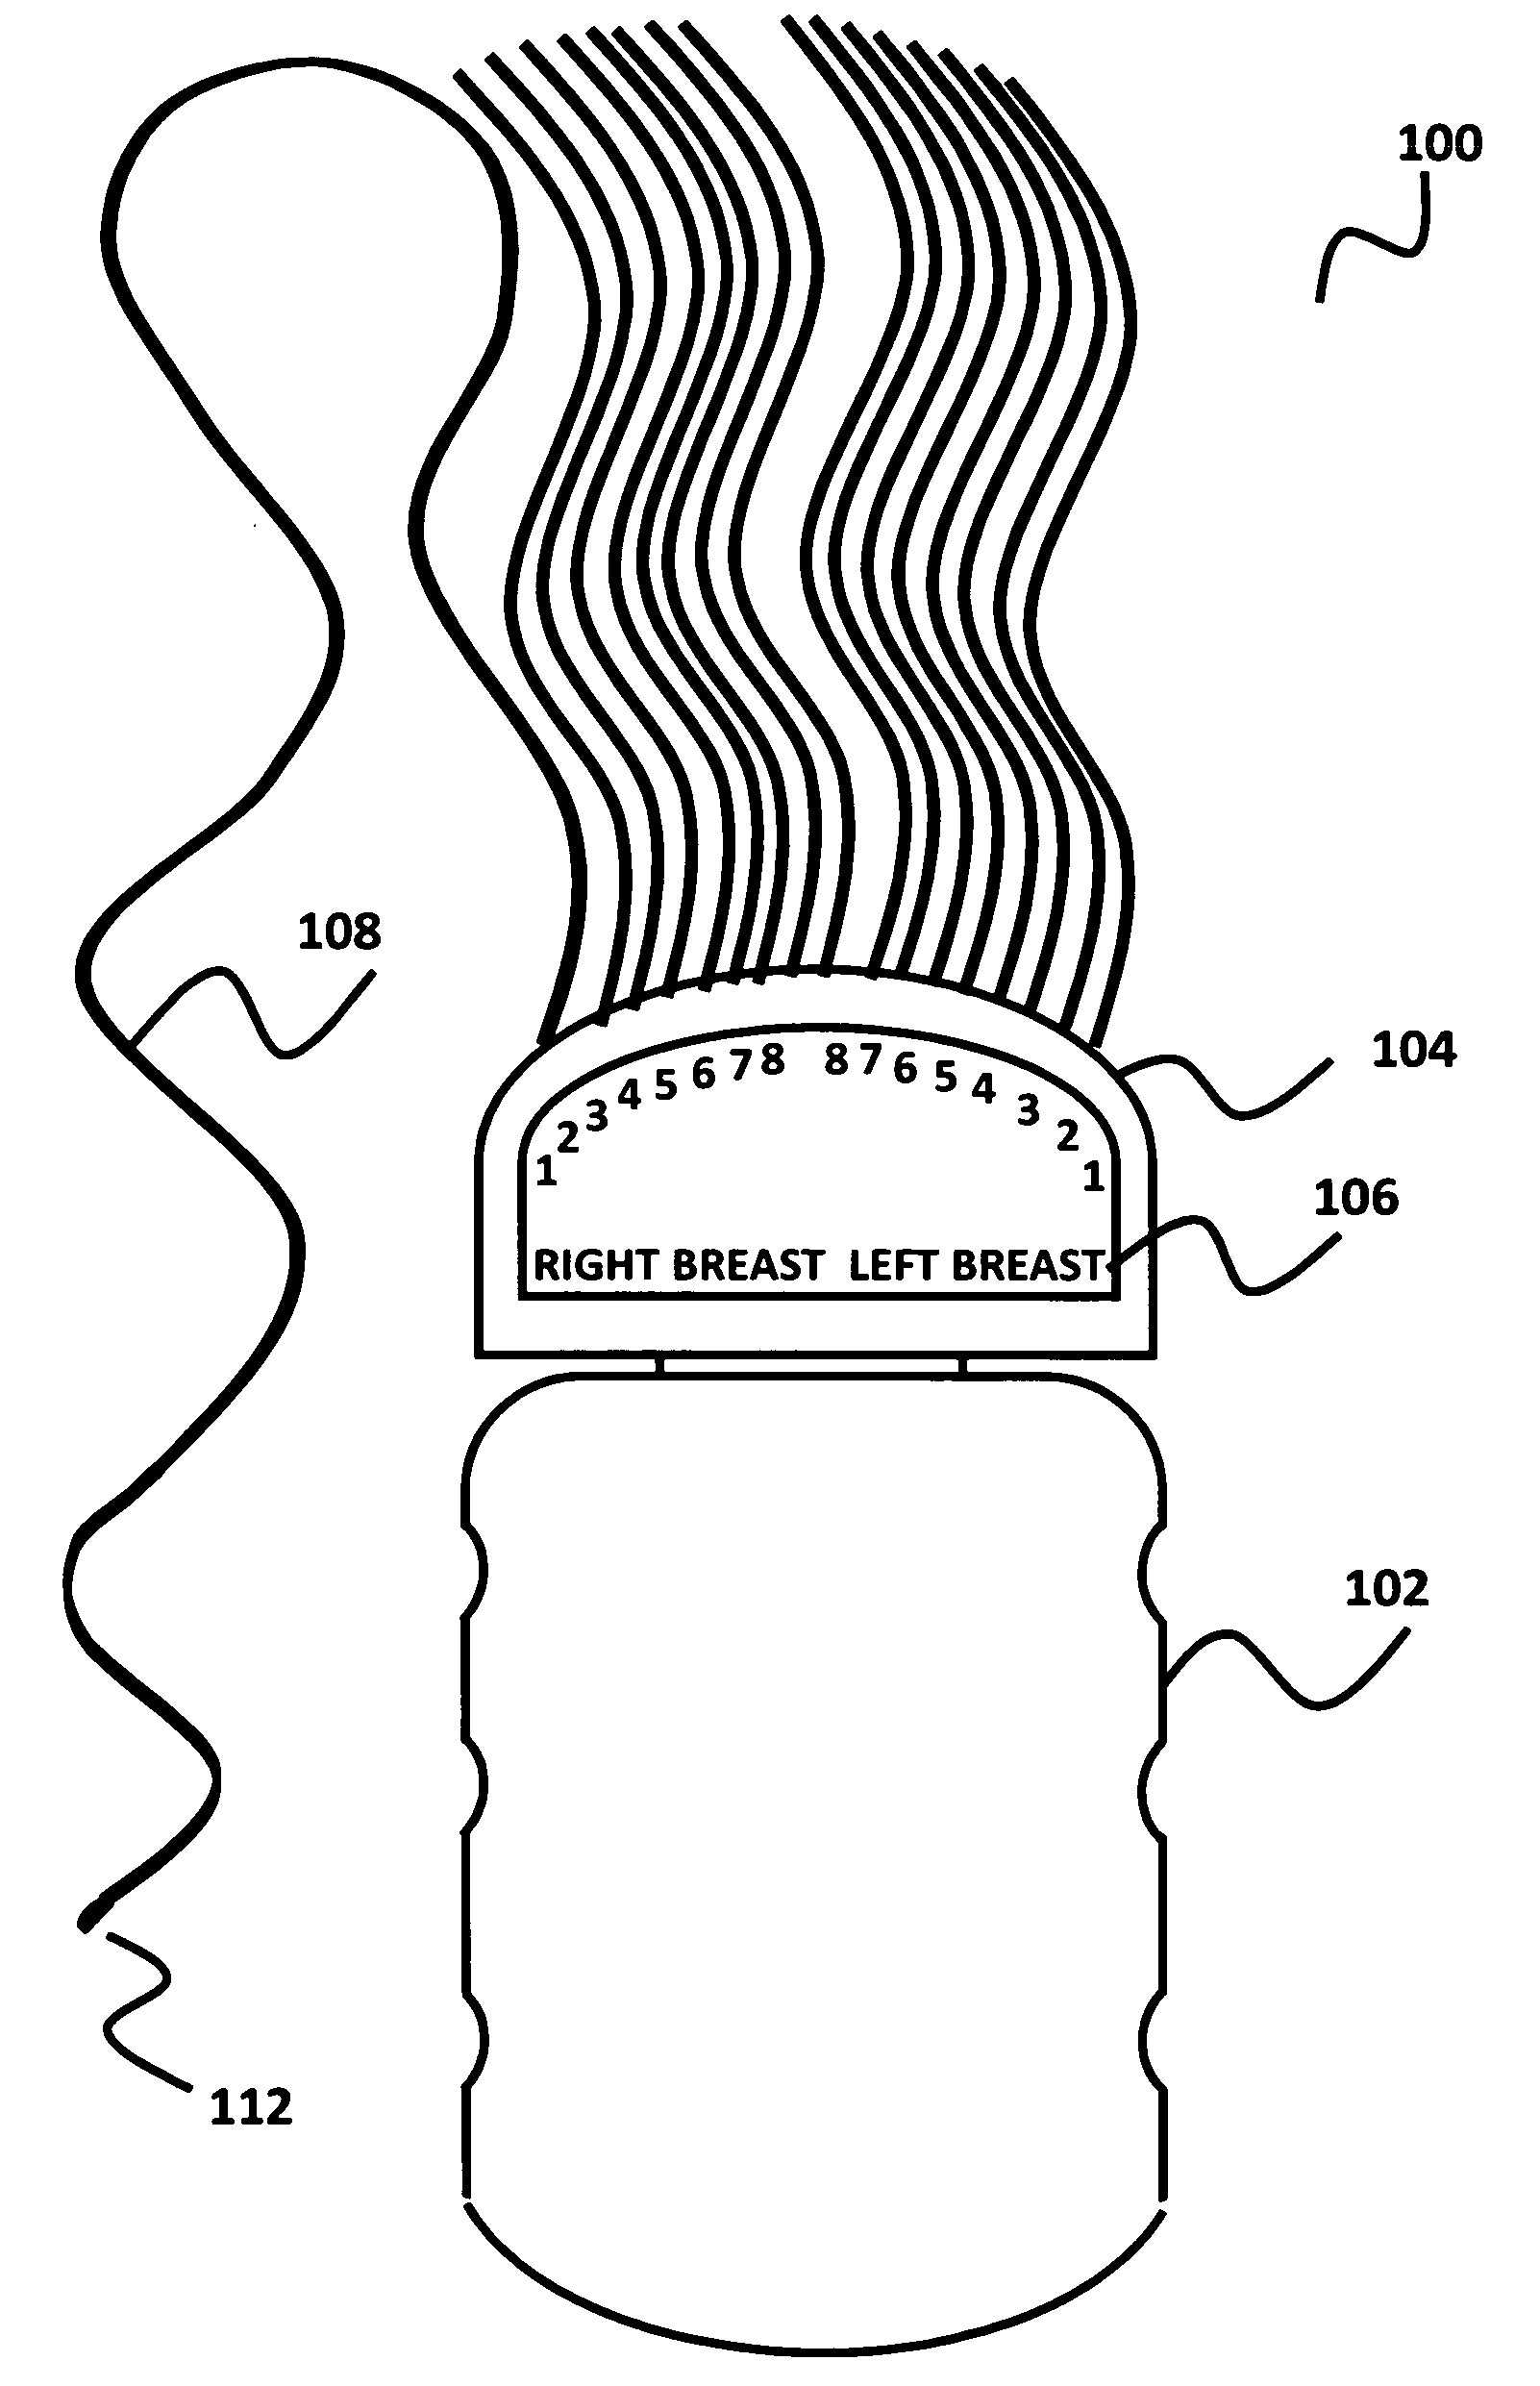 Methods for collecting and analyzing thermal data based on breast surface temperature to determine suspect conditions